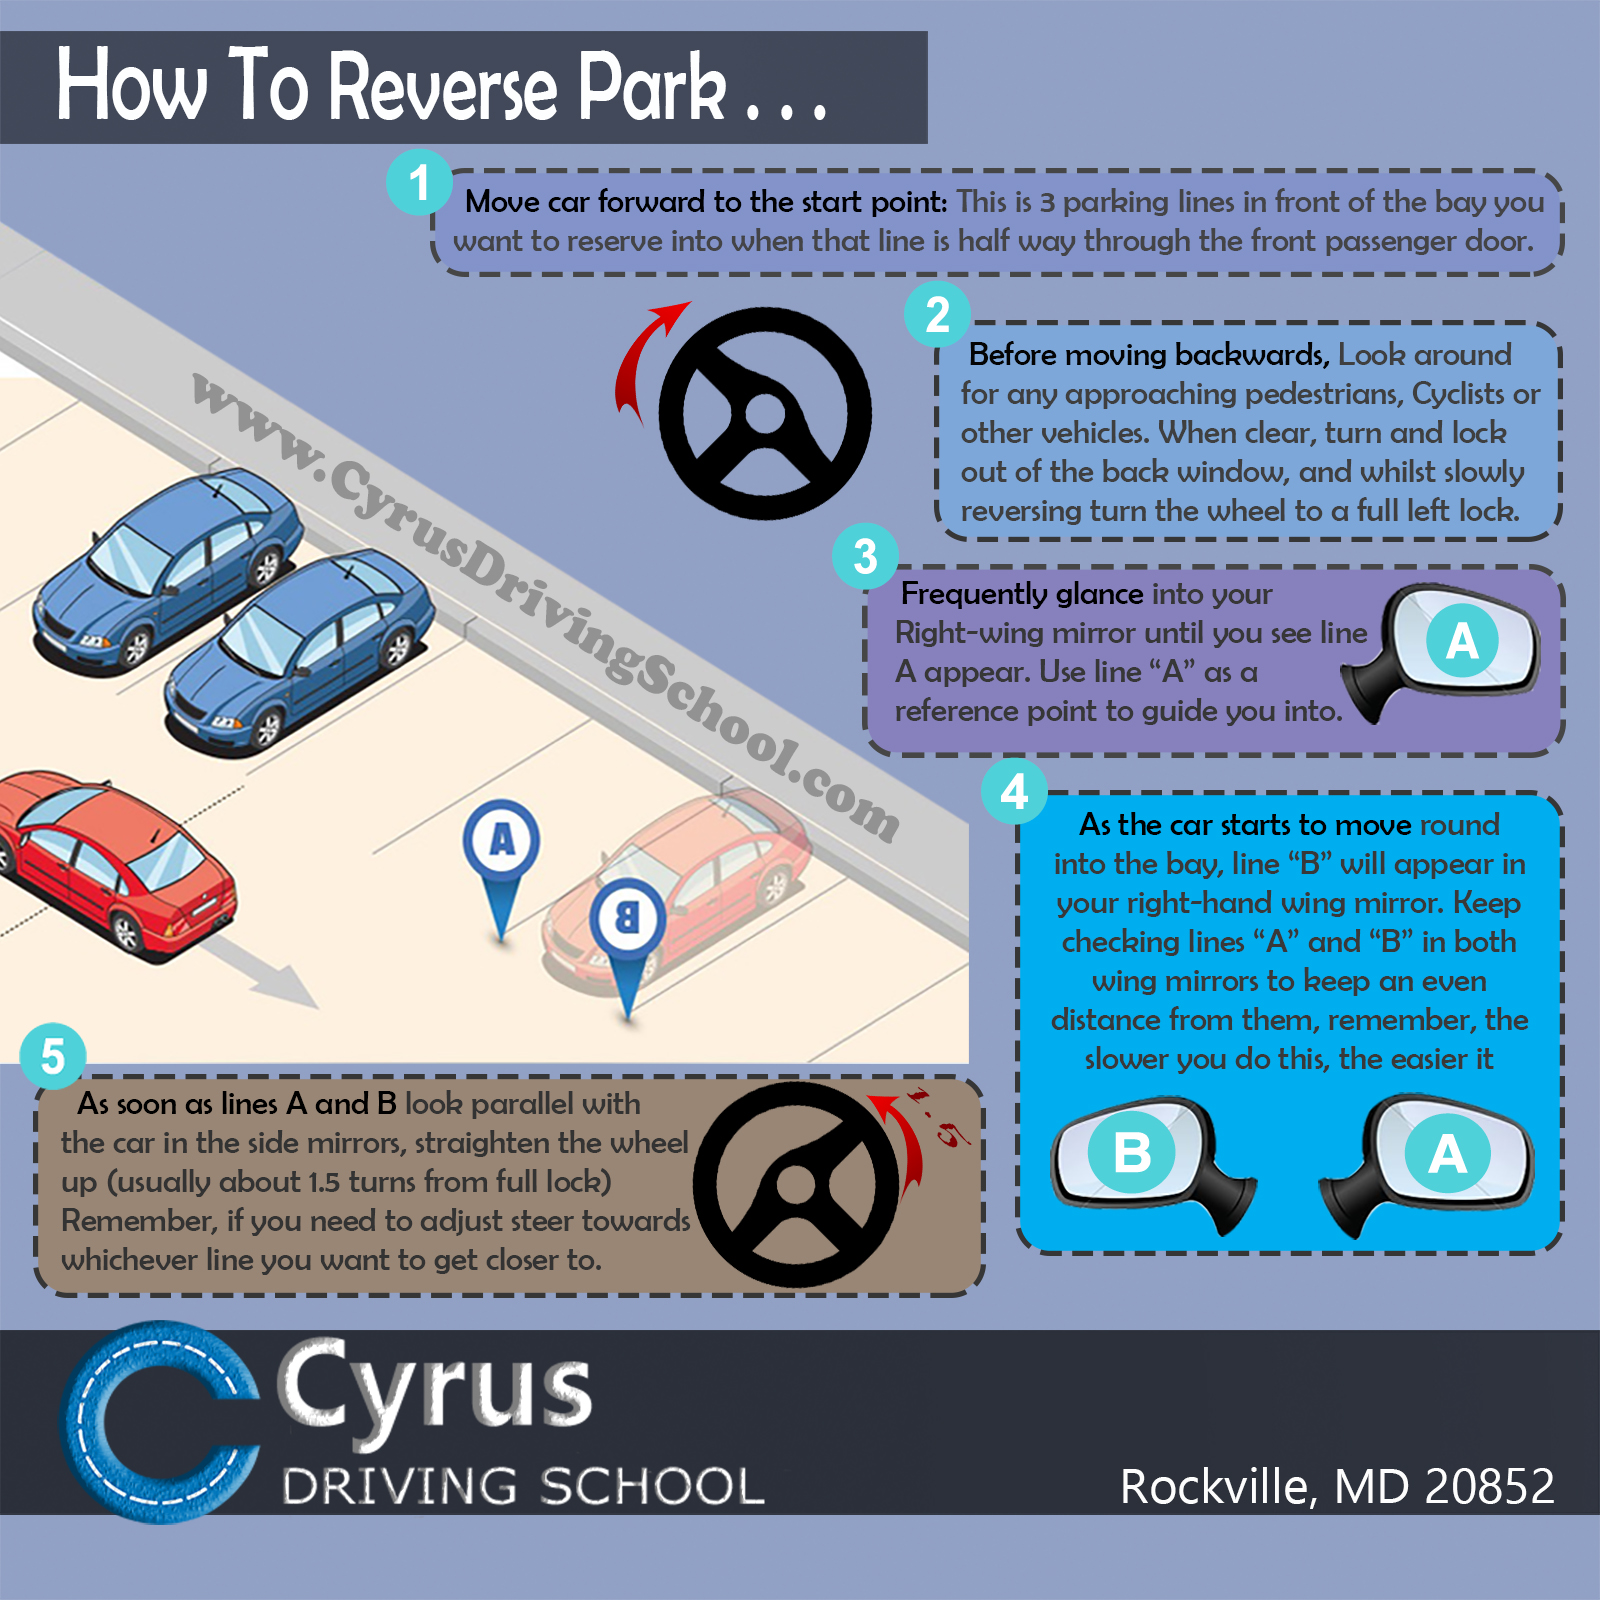 How to Reverse Park ...